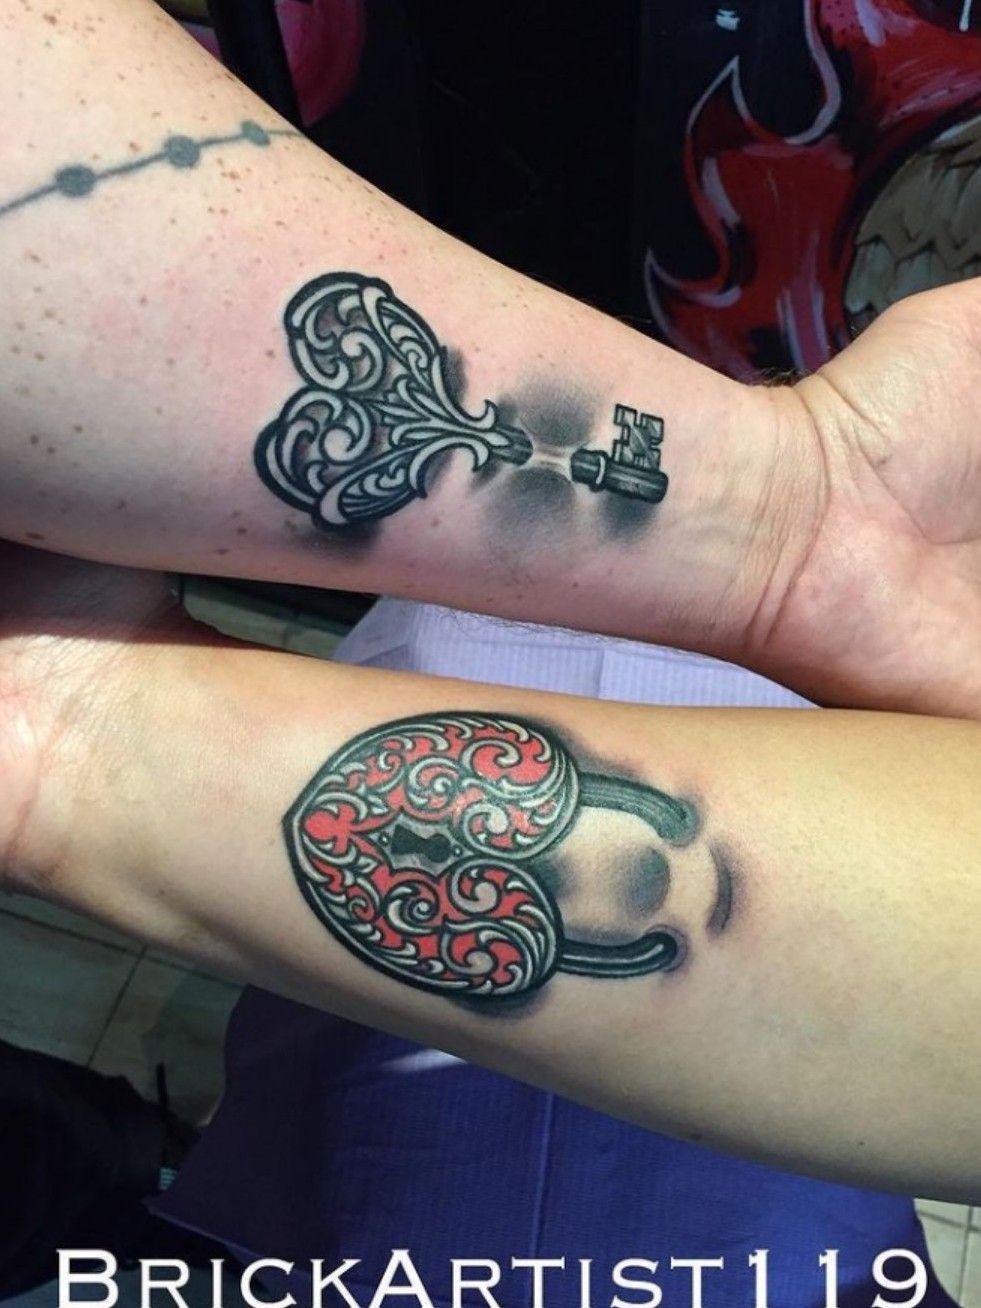 25 Love Tattoos For That Someone Special  Gumtoo